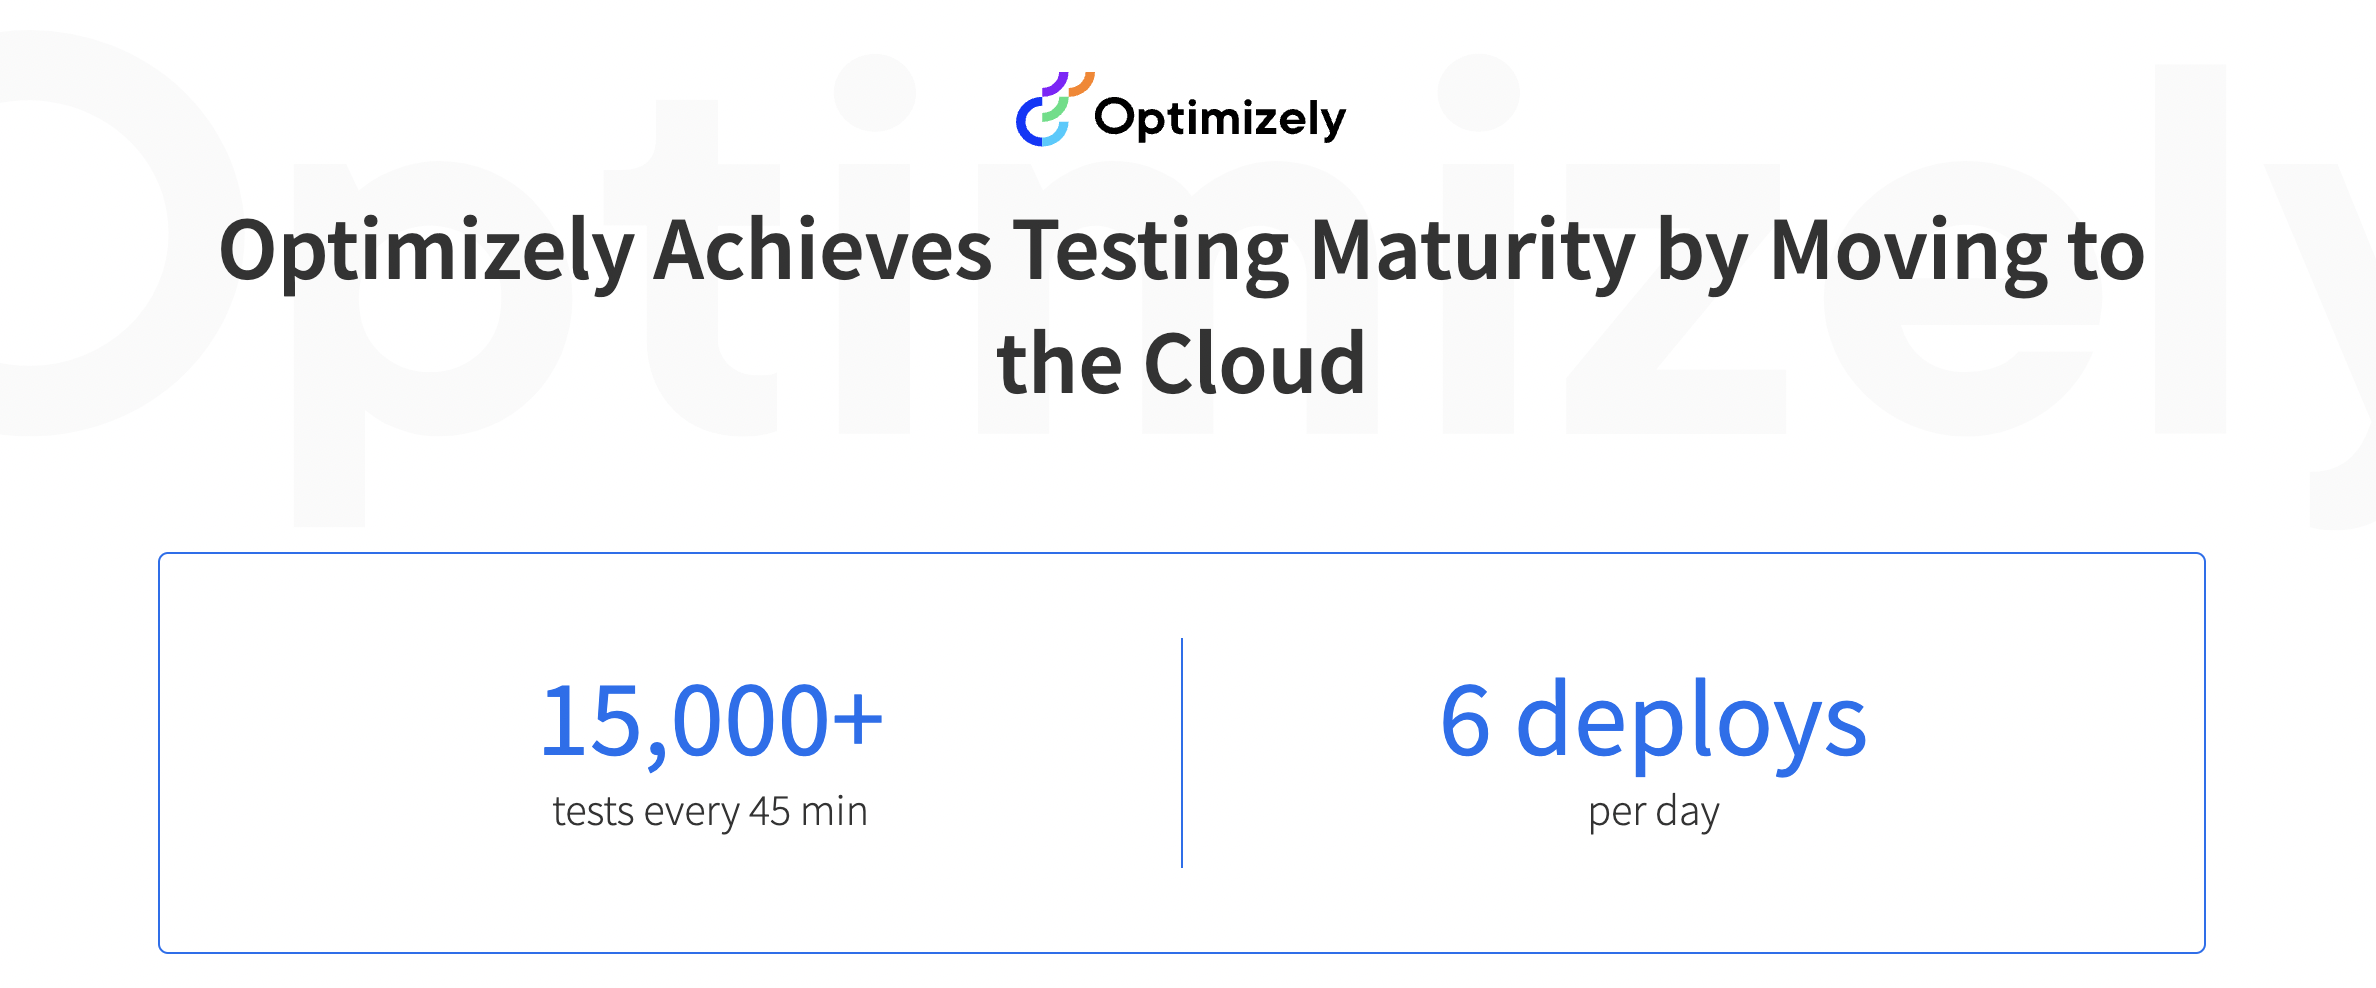 Optimizely - BrowserStack Case Study